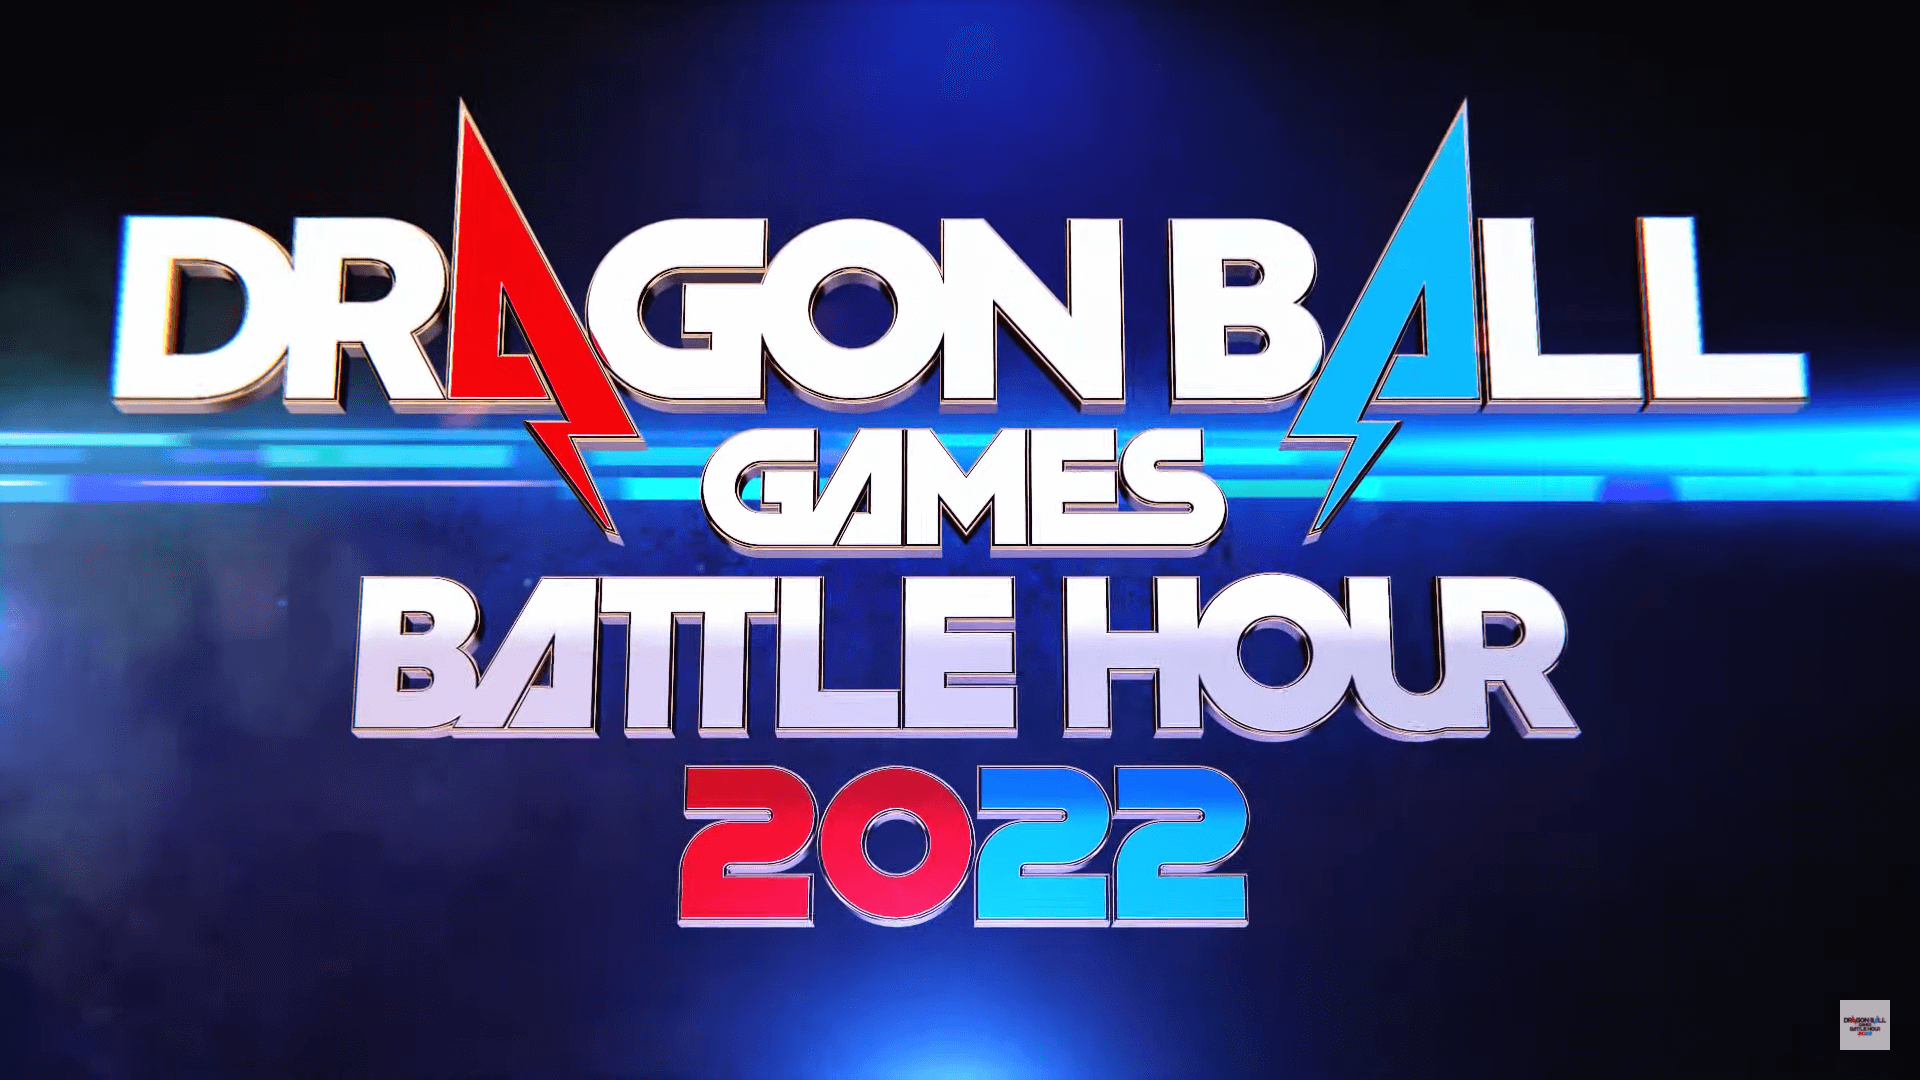 Dragon Ball Games Battle Hour is planned for February